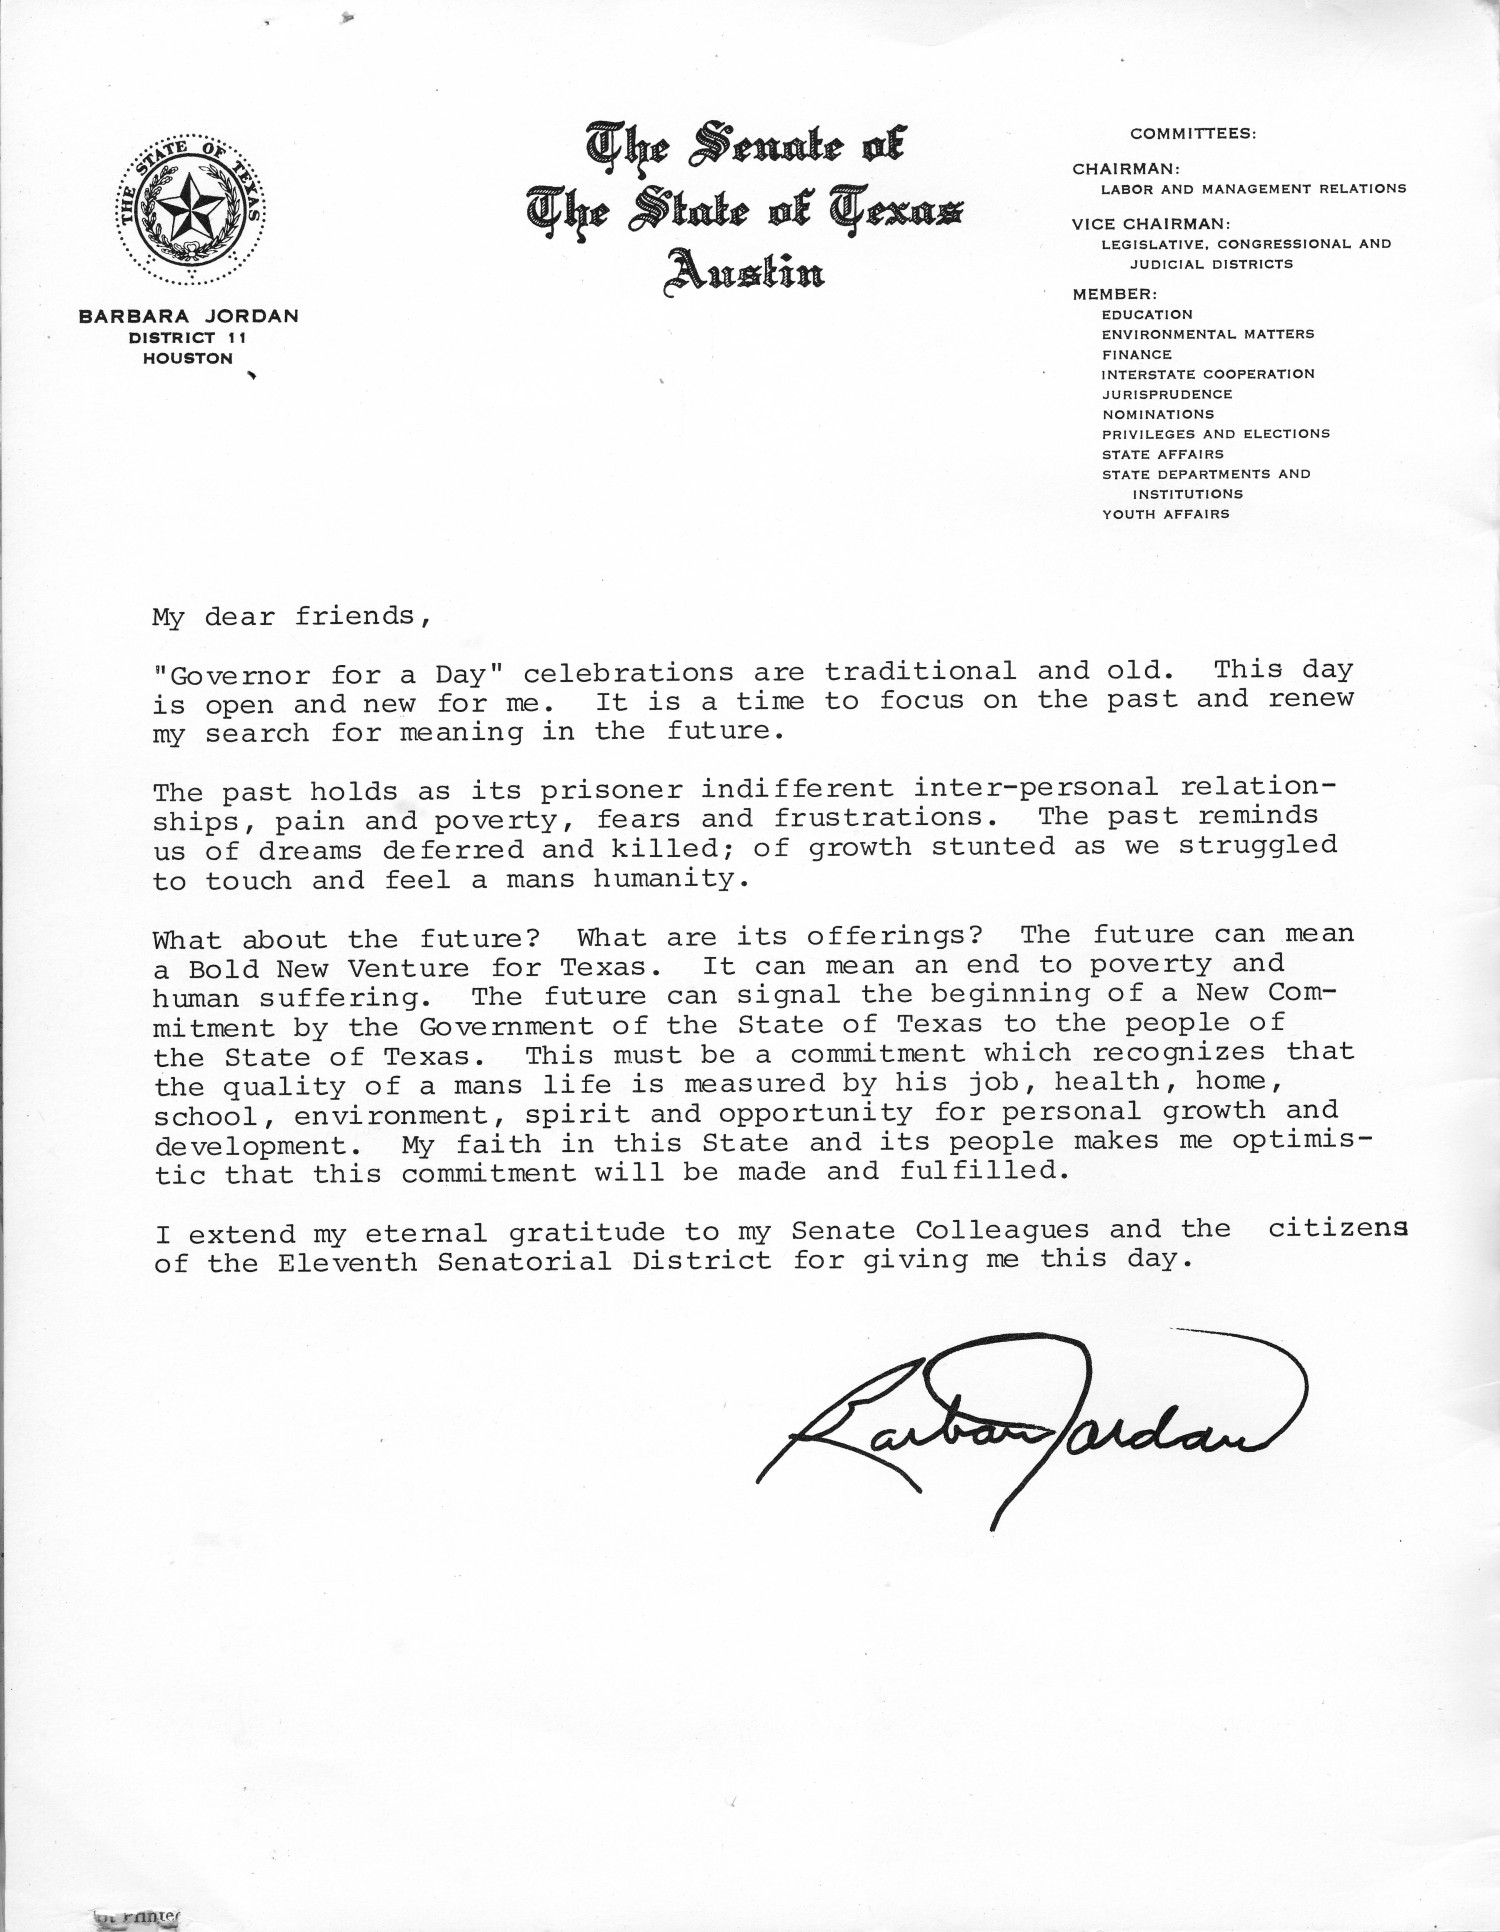 Barbara Jordan - Governor of Texas for a day - June 10, 1972
                                                
                                                    [Sequence #]: 2 of 8
                                                